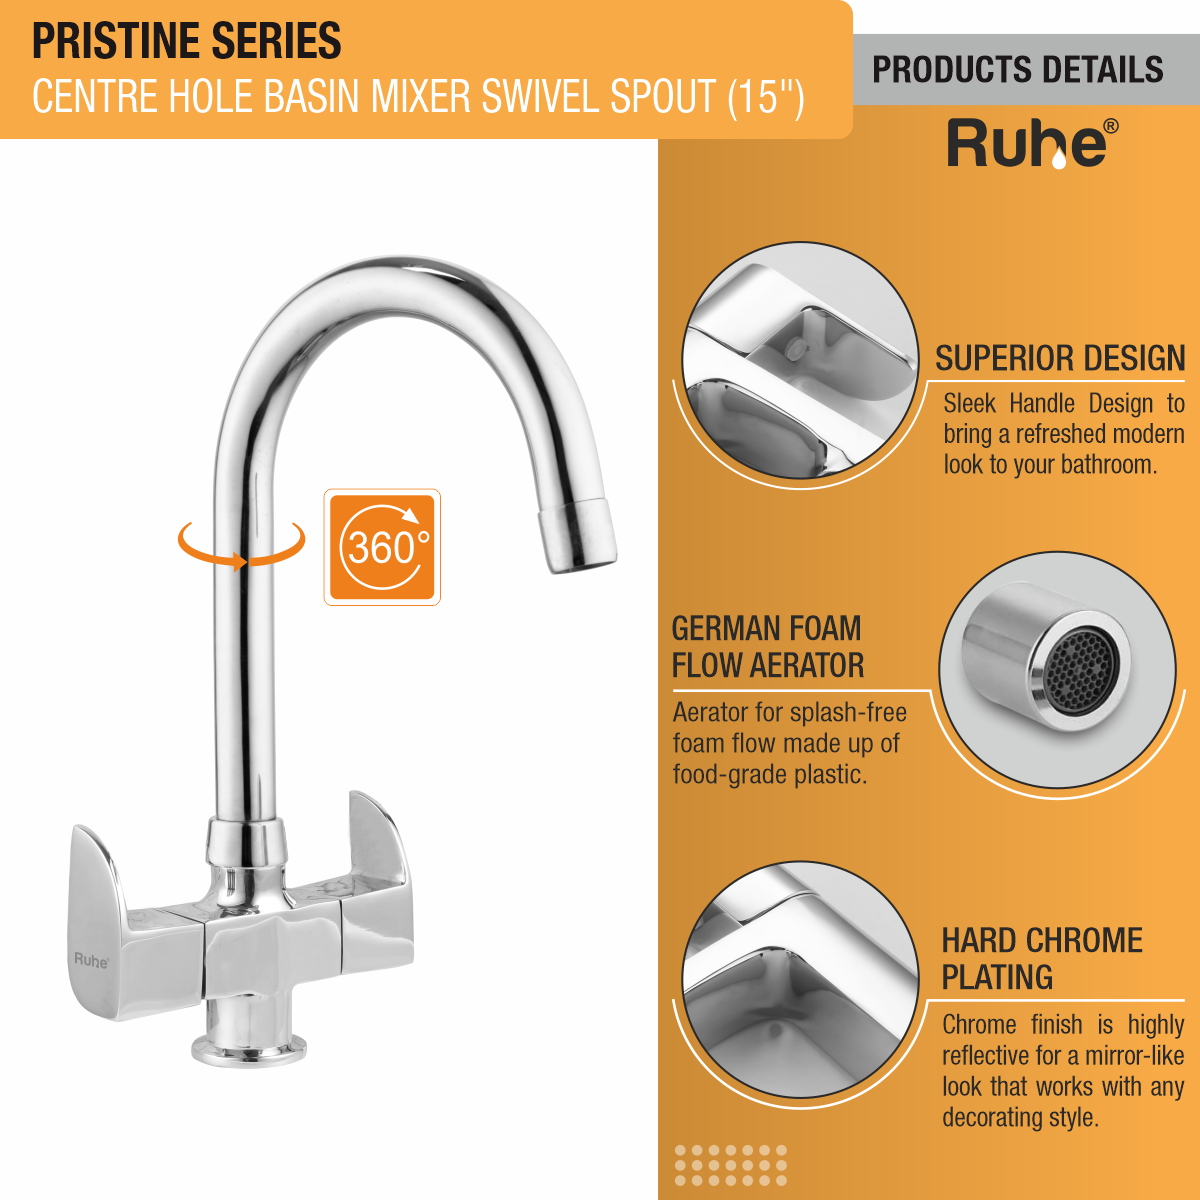 Pristine Centre Hole Basin Mixer with Medium (15 inches) Round Swivel Spout Faucet product details